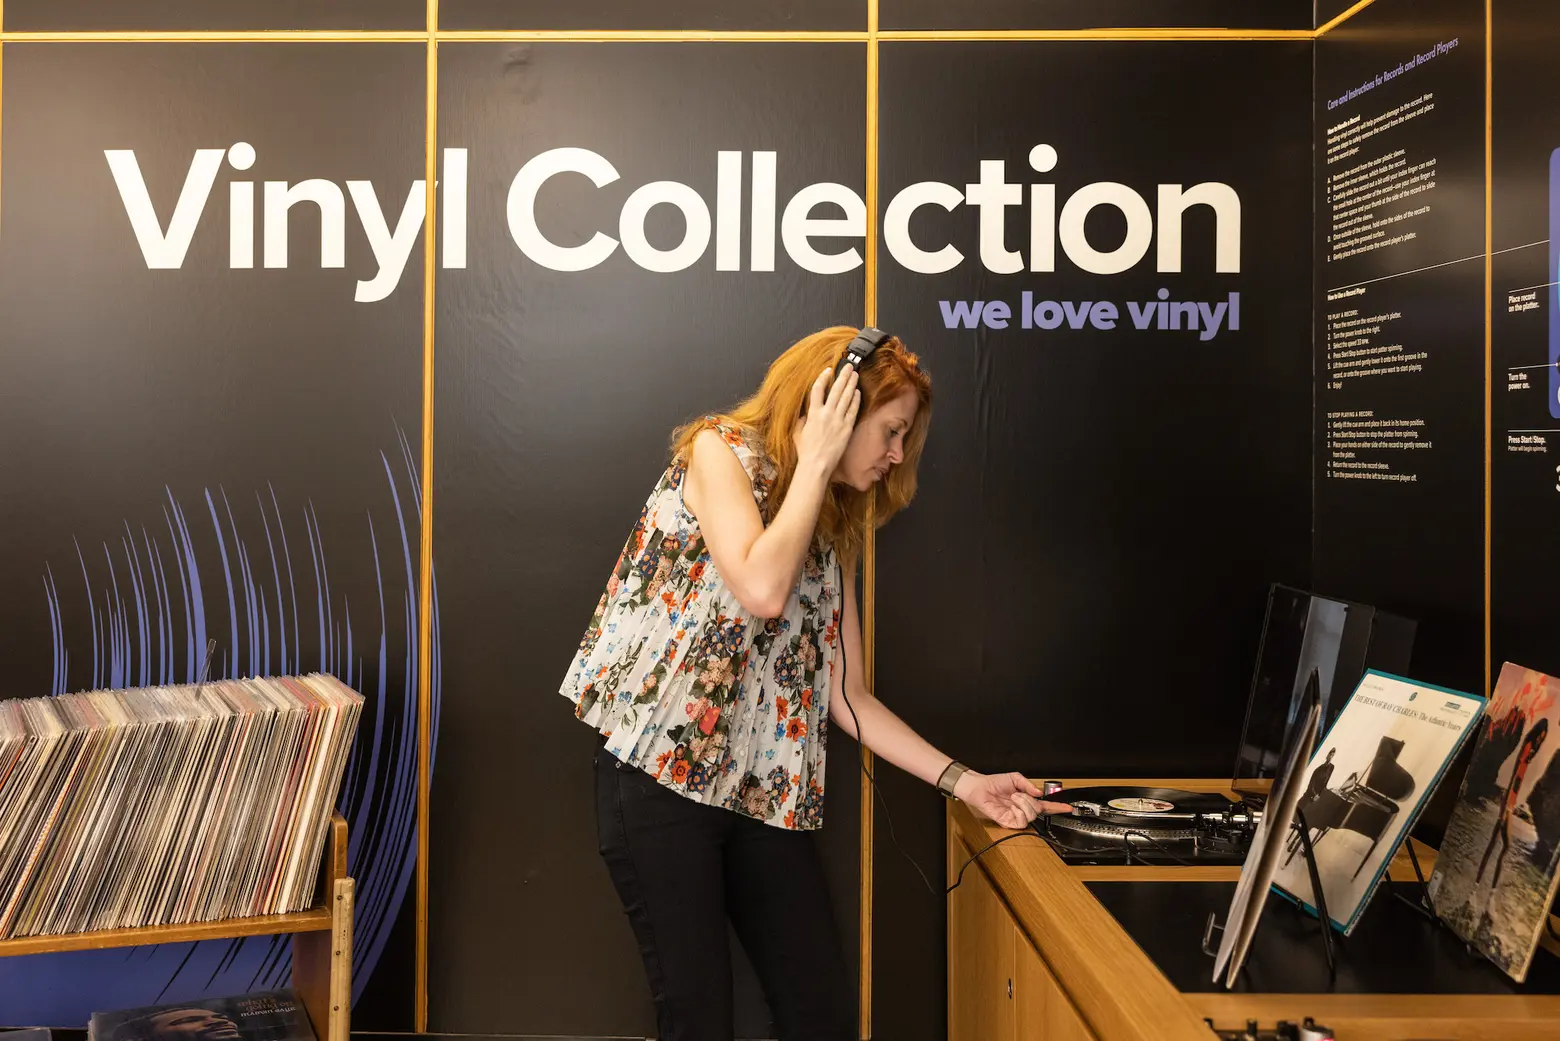 You can browse and borrow vinyl records at the Brooklyn Public Library